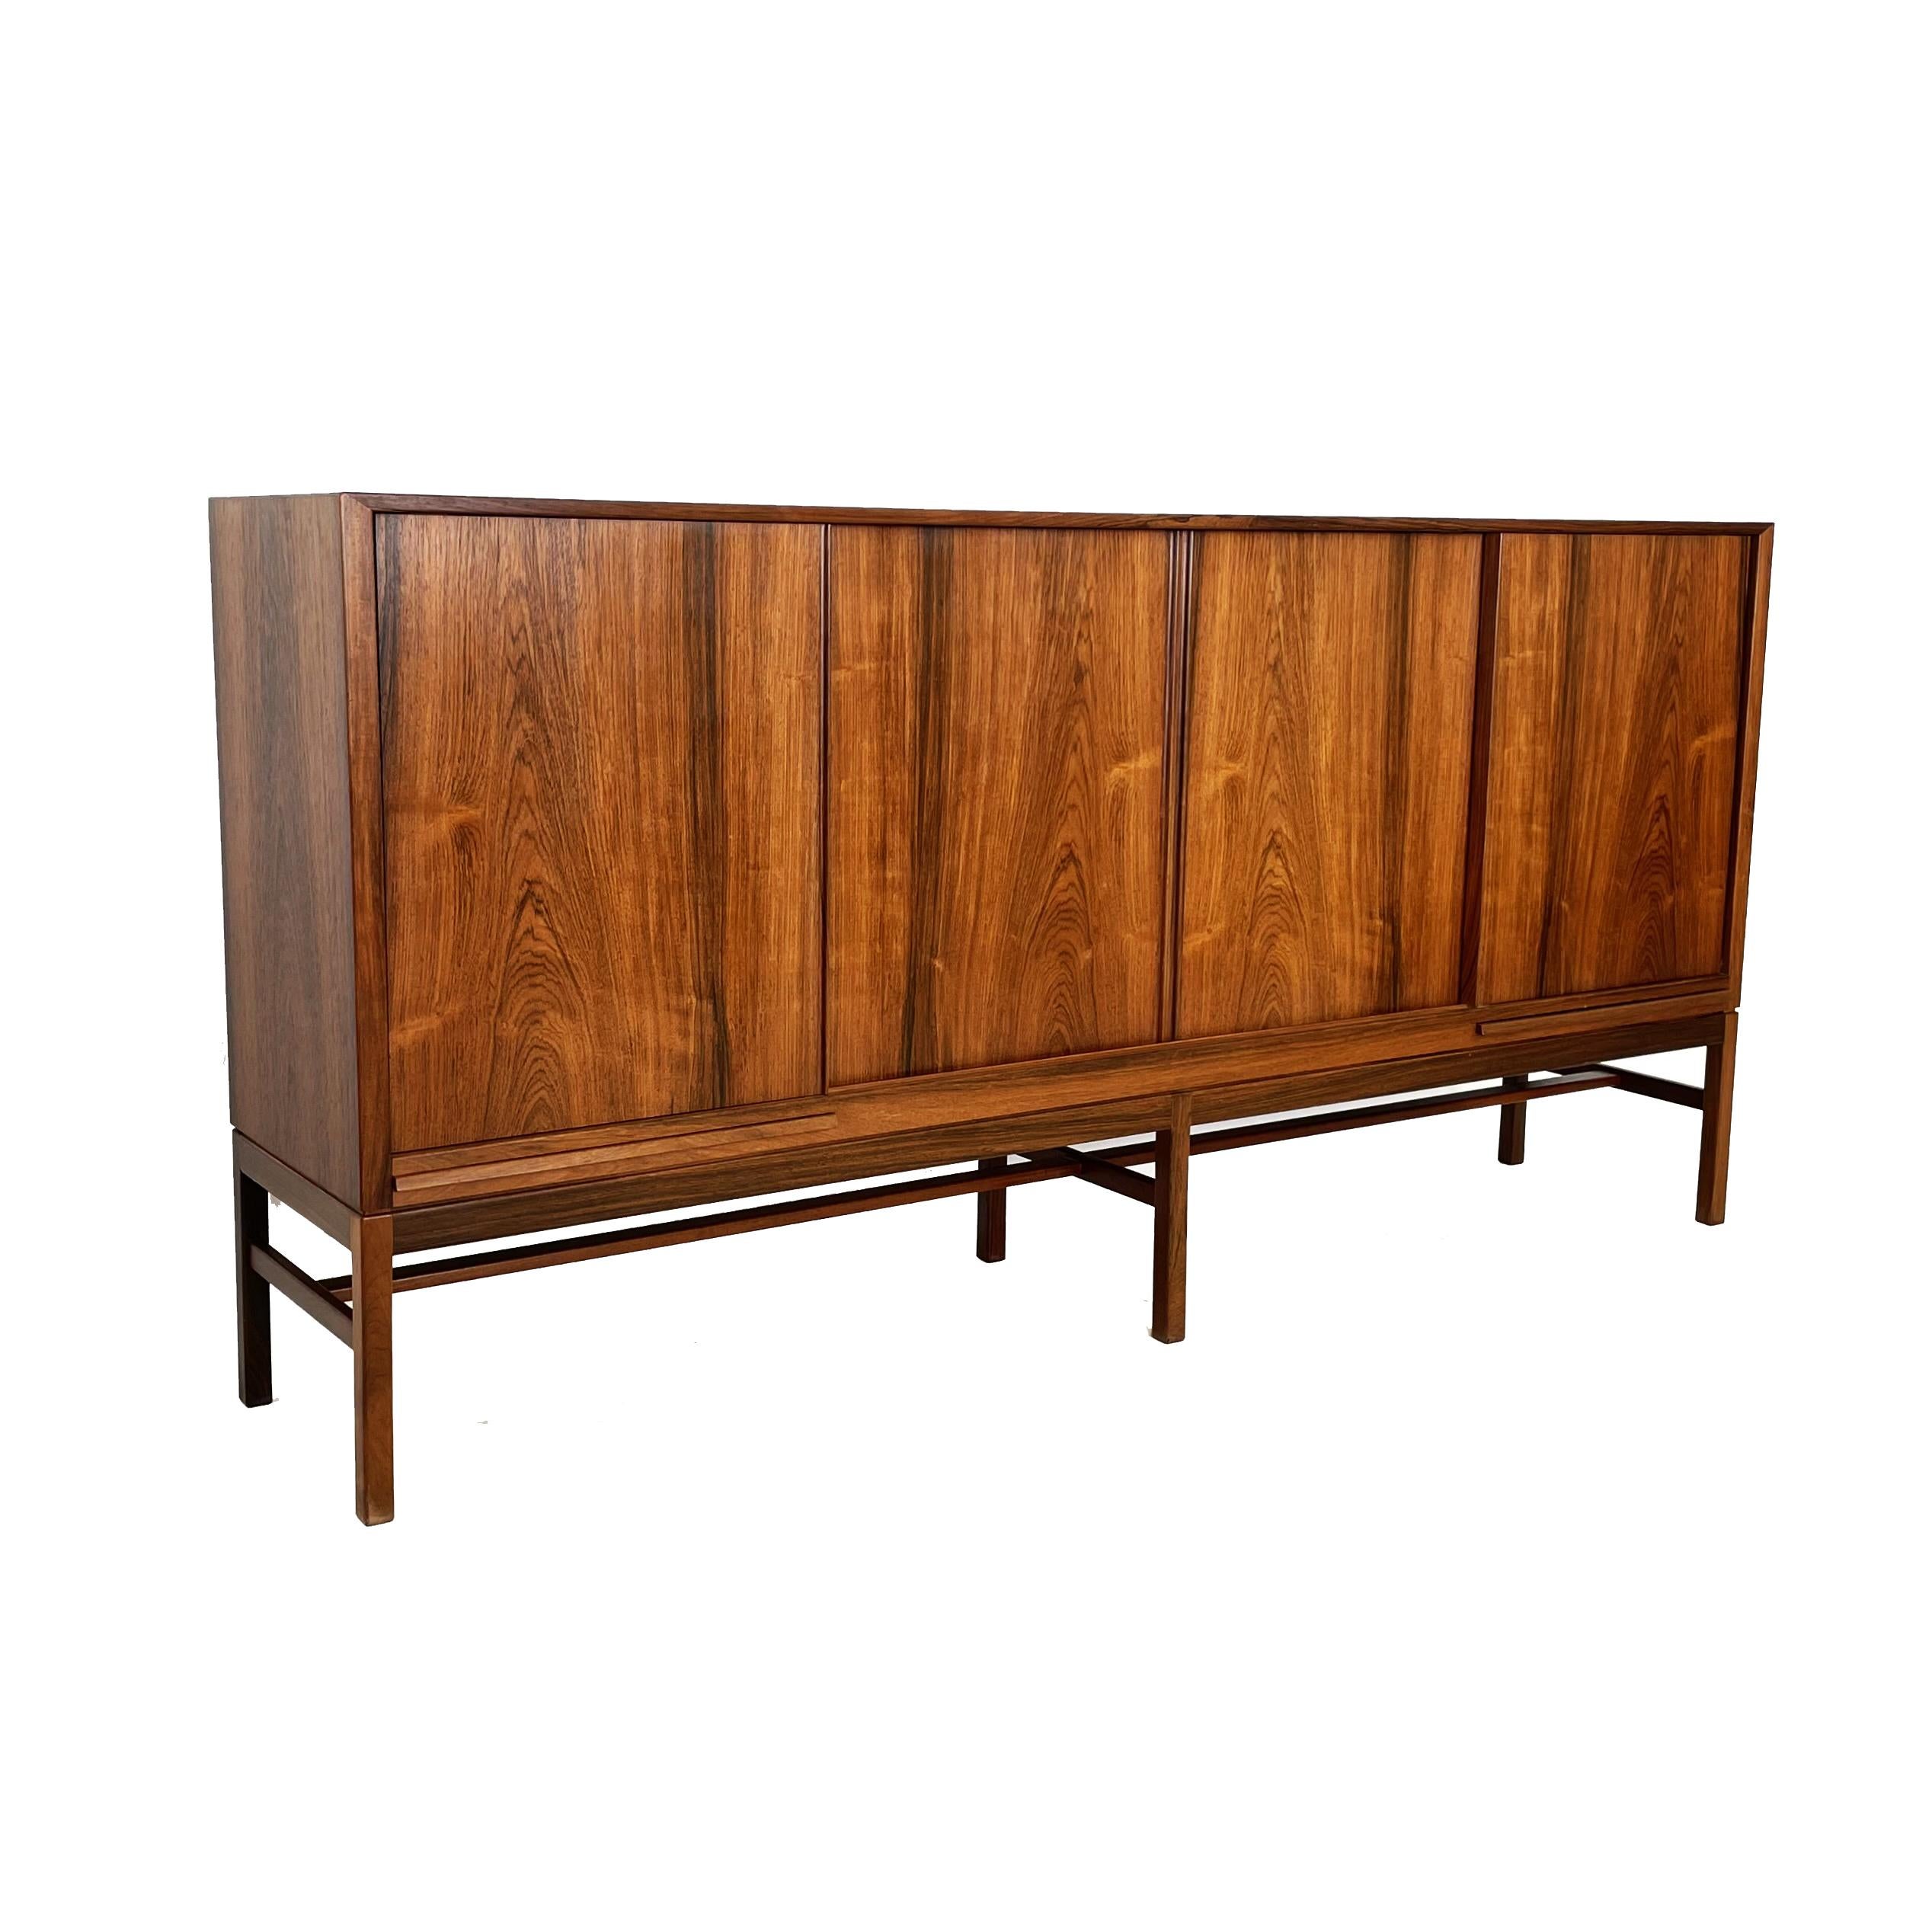 Very nice and rare Kurt Østervig sideboard. Mid-Century Brazilian Rosewood with  book-matched grain on four sliding doors. Interior in light oak. Shelves on the inside, five beautifully handcrafted drawers with detailed inserts.  Adjustable shelves.